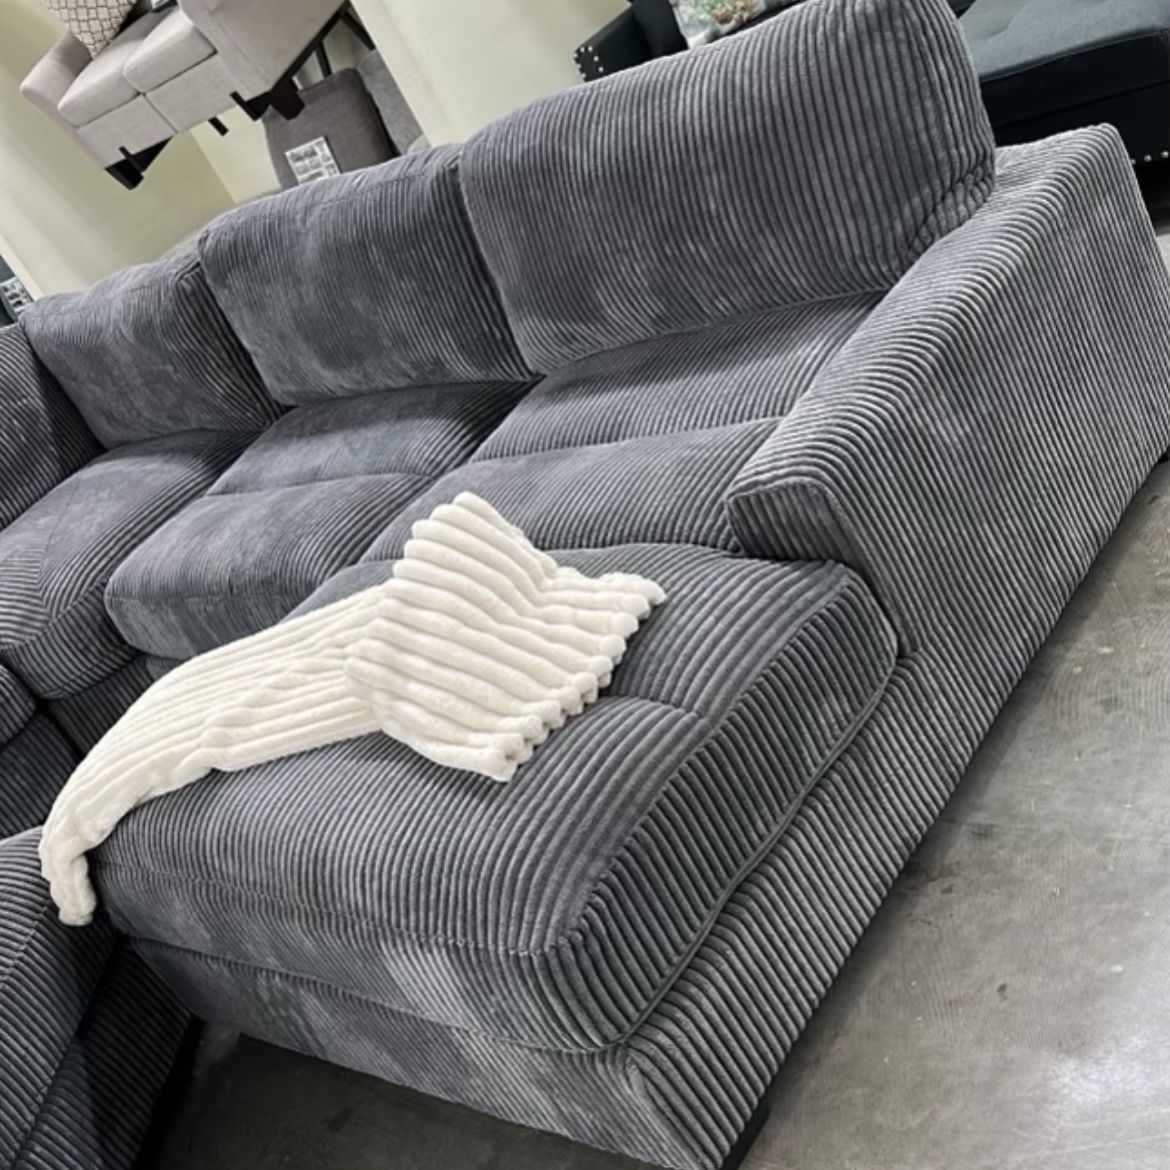 Extra Large Ivory Or Grey Modular Sectional 7 Piece Set Extra Plush Corduroy Fabric Brand New In Box Firm Price $1,380 